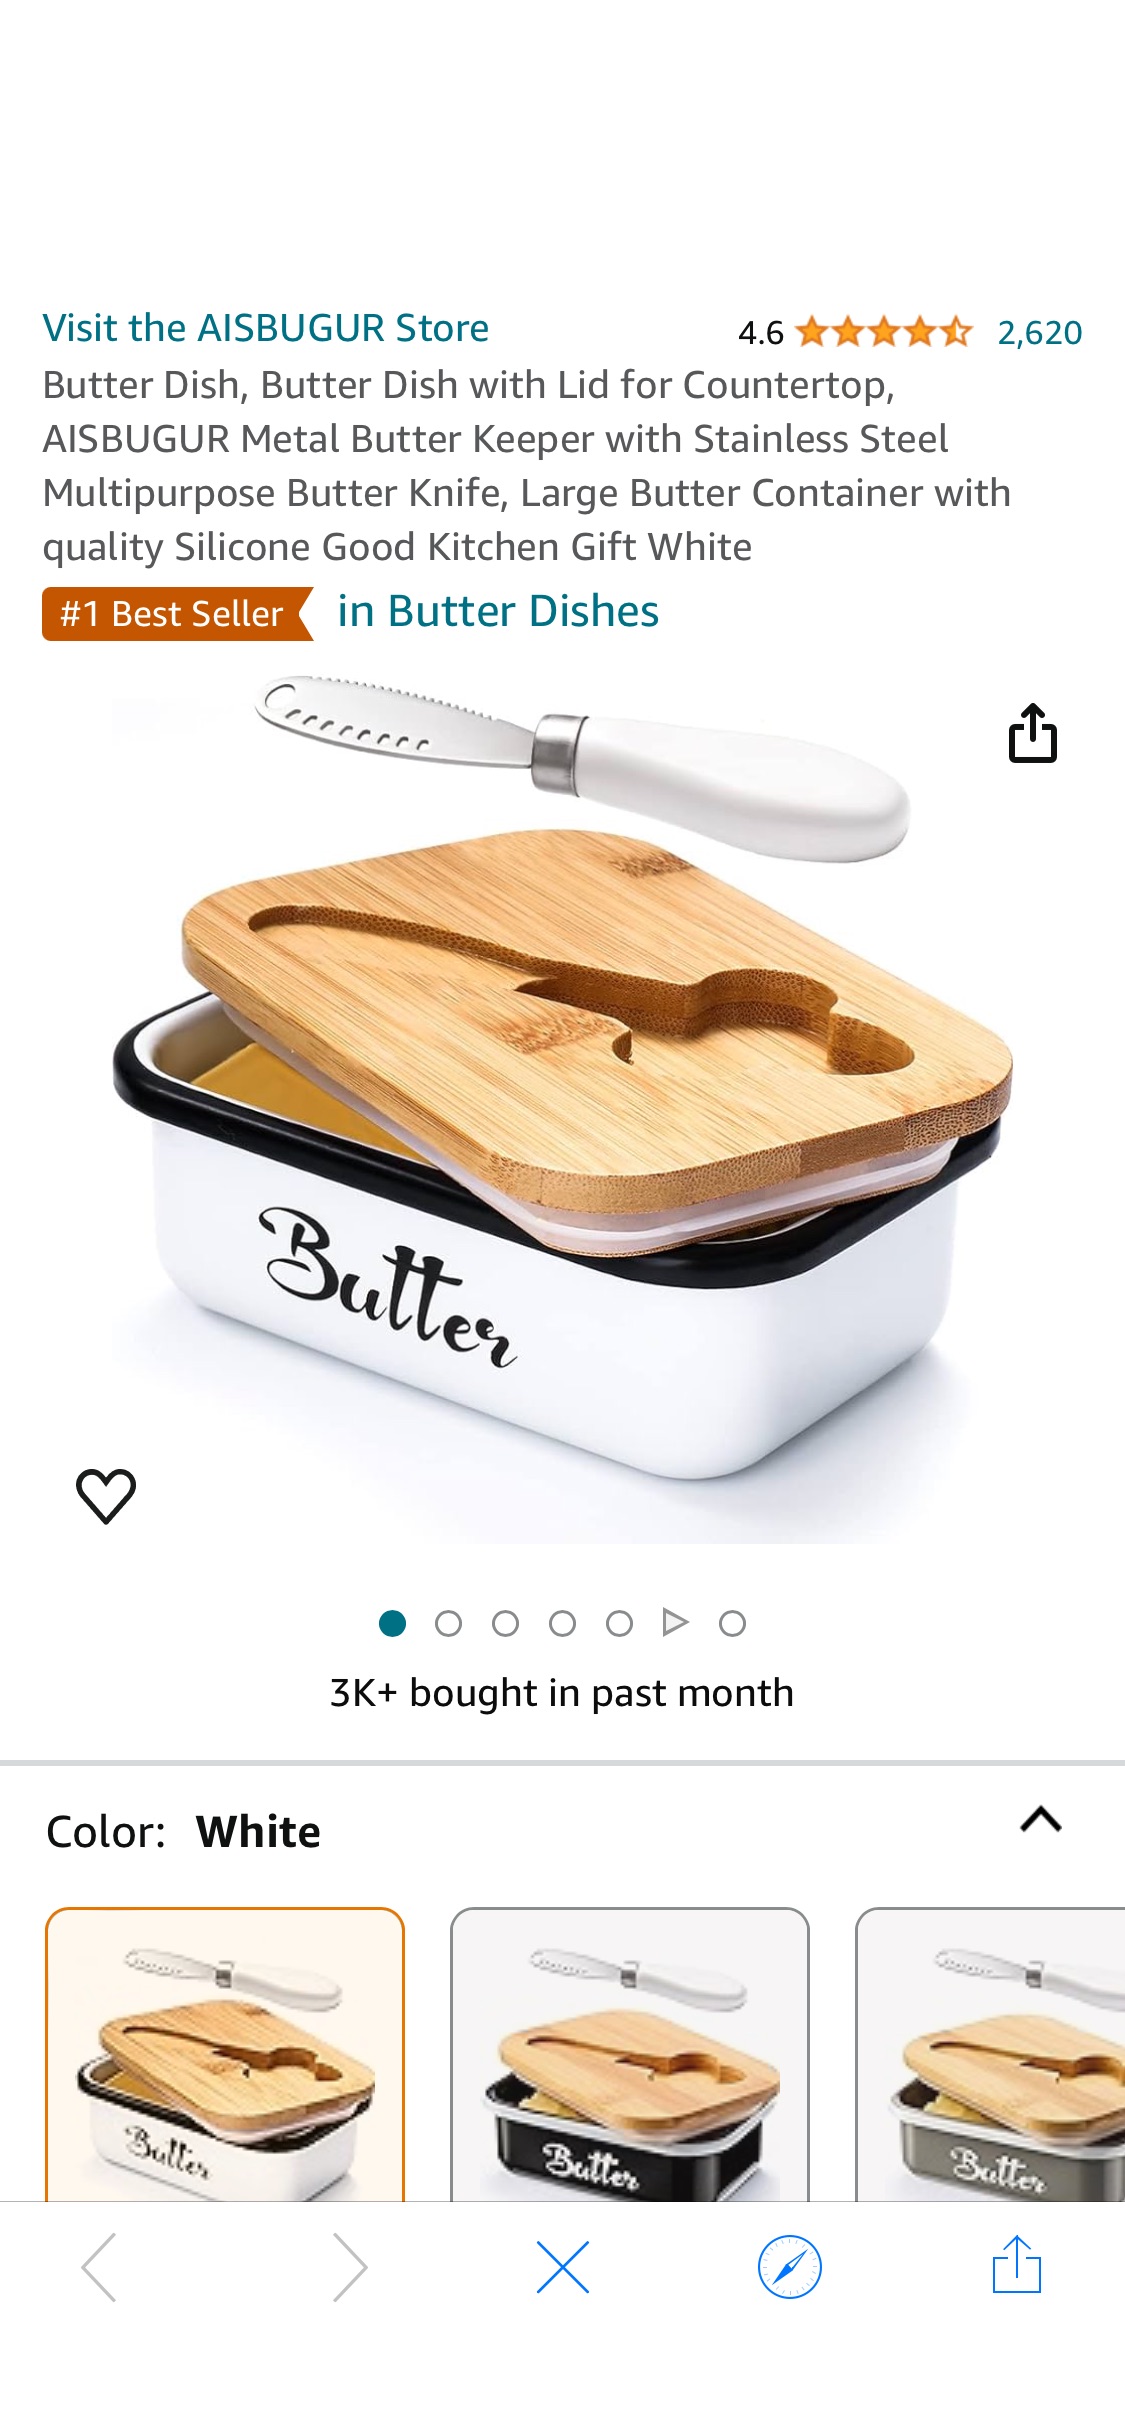 Amazon.com | Butter Dish, Butter Dish with Lid for Countertop, AISBUGUR Metal Butter Keeper with Stainless Steel Multipurpose Butter Knife, Large Butter Container with quality Silicone Good Kitchen Gi